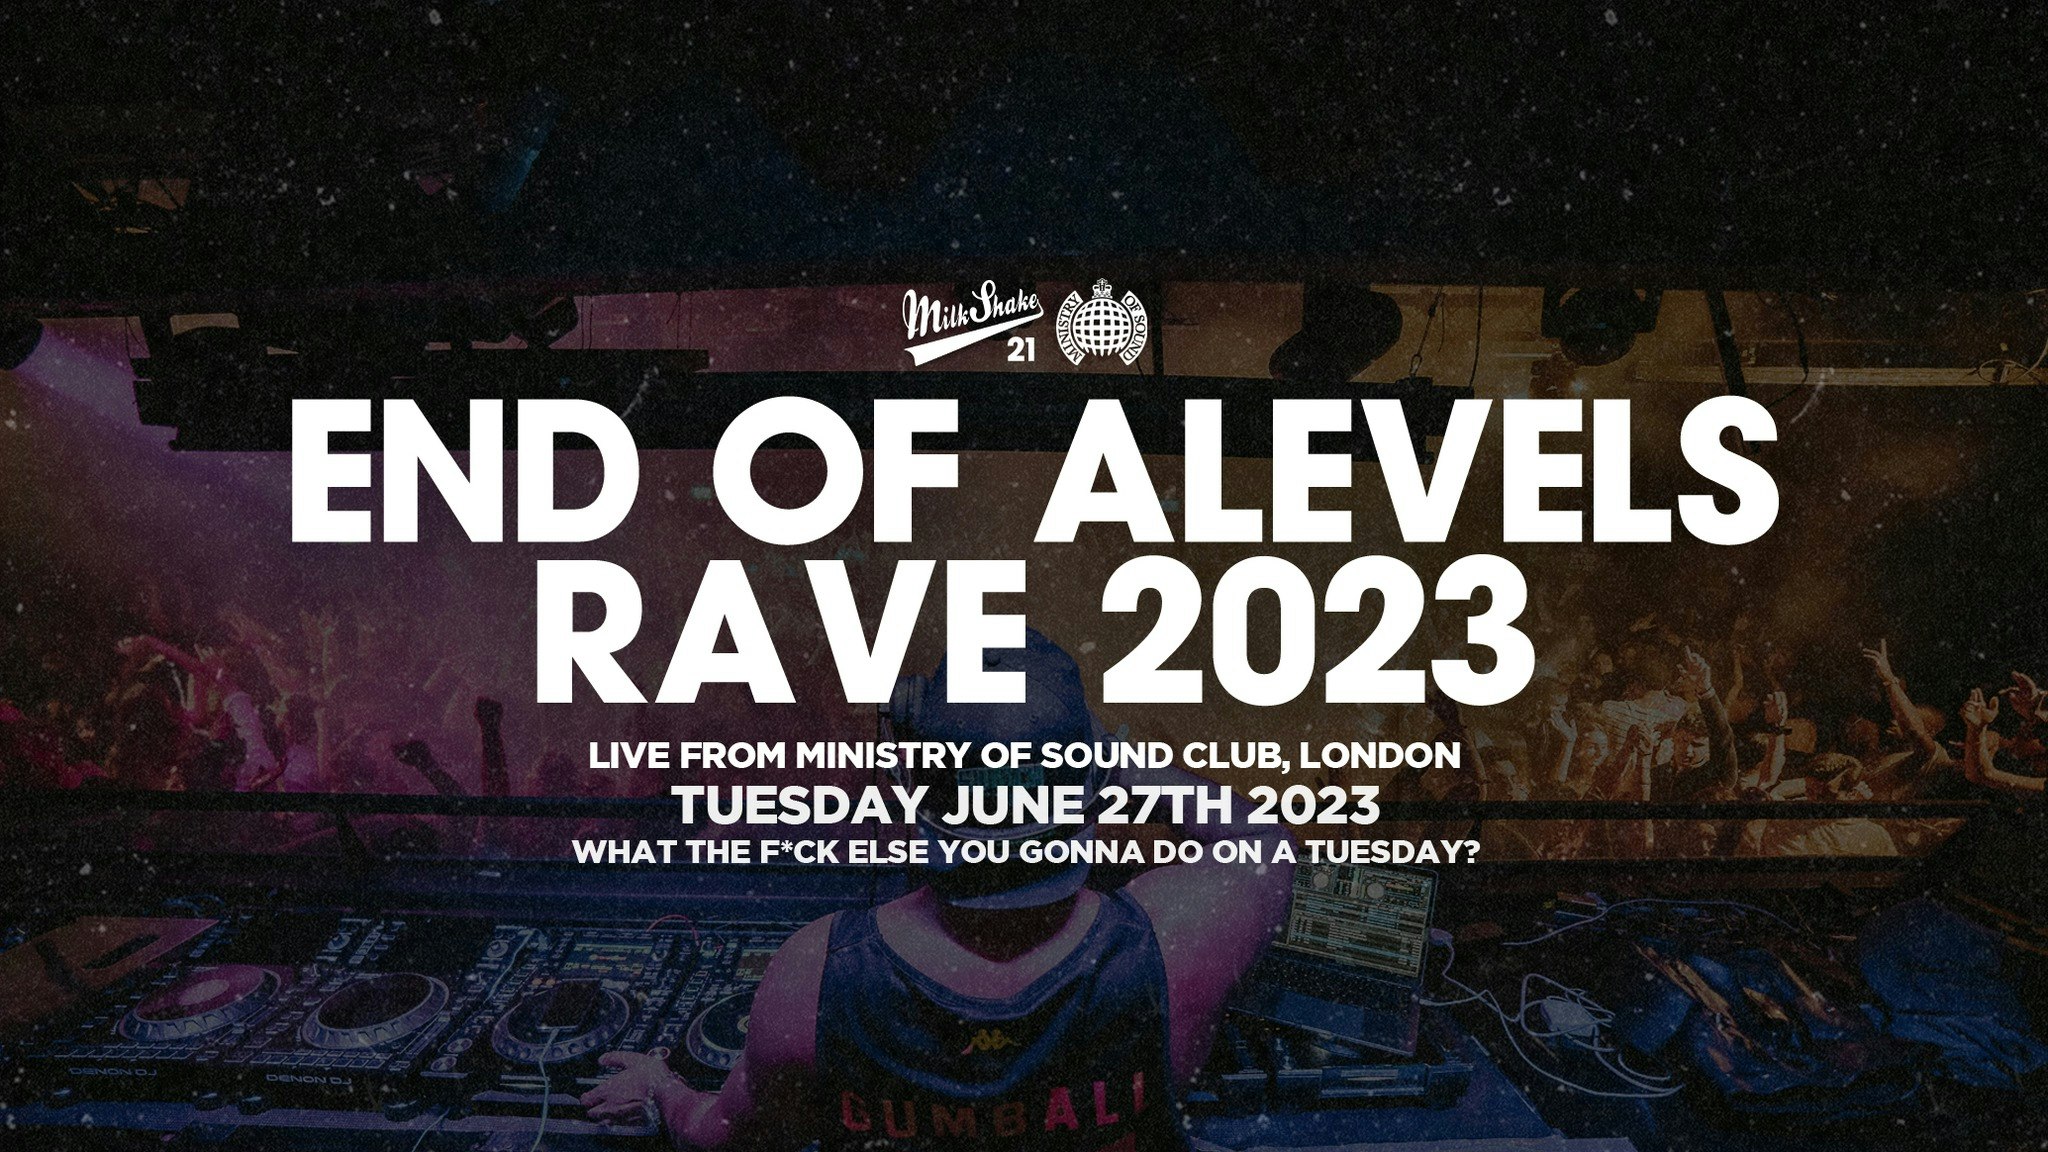 ⛔️ SOLD OUT⛔️ Milkshake, Ministry of Sound | End Of A-Levels Rave 2023 🔥 June 27th -⛔️ SOLD OUT⛔️